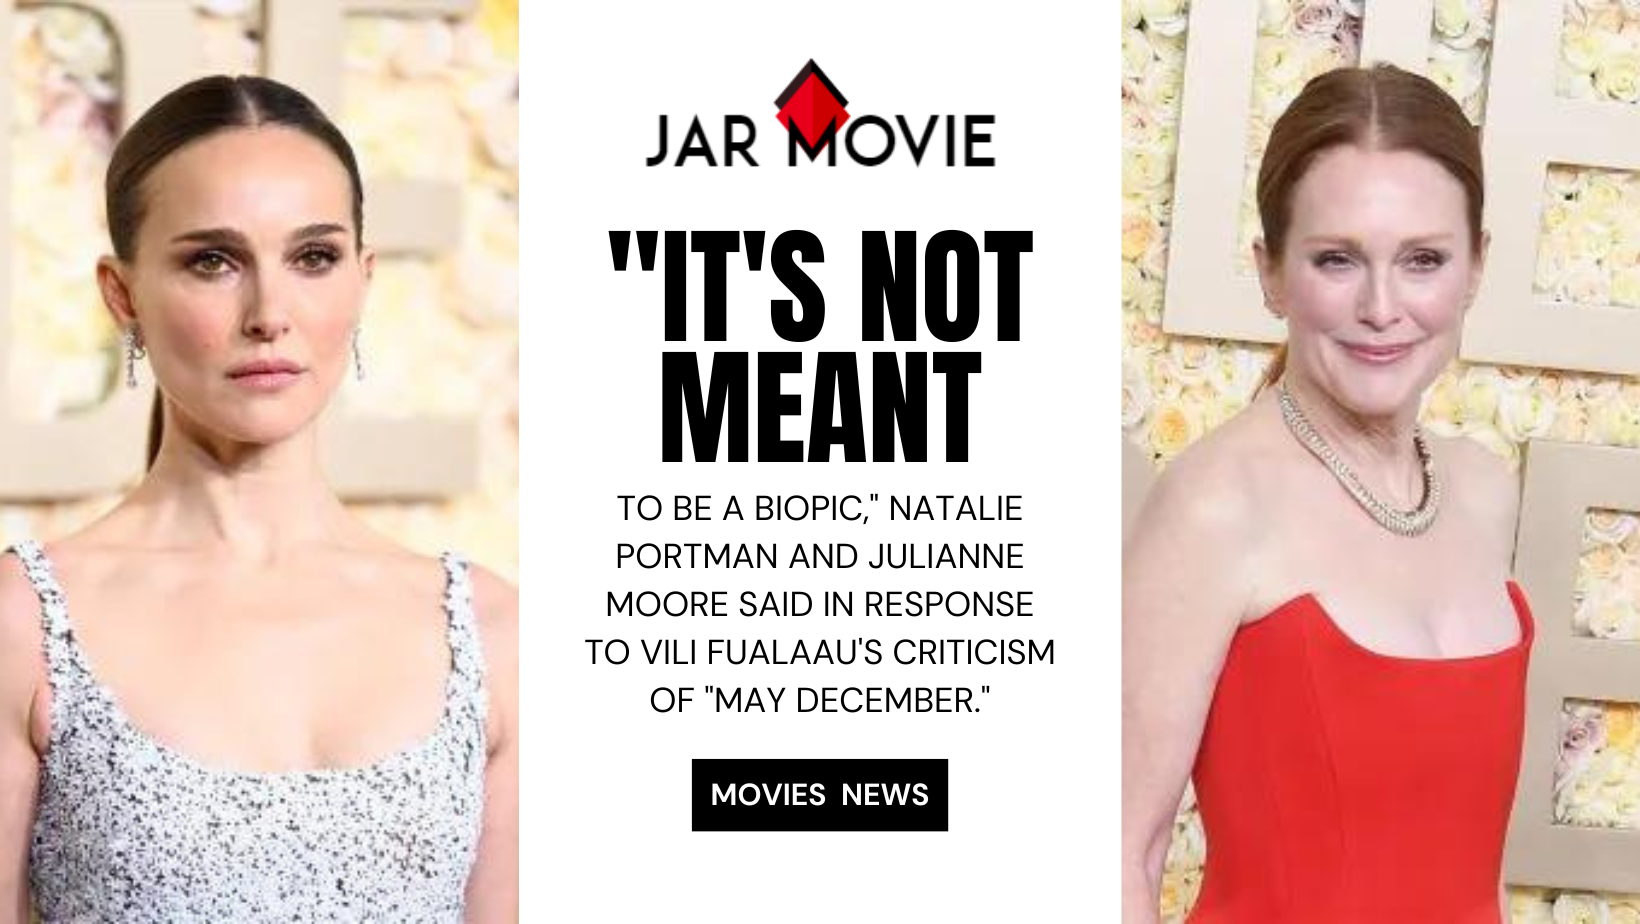 It's Not Meant to Be a Biopic, Natalie Portman and Julianne Moore said in response to Vili Fualaau's criticism of May December.